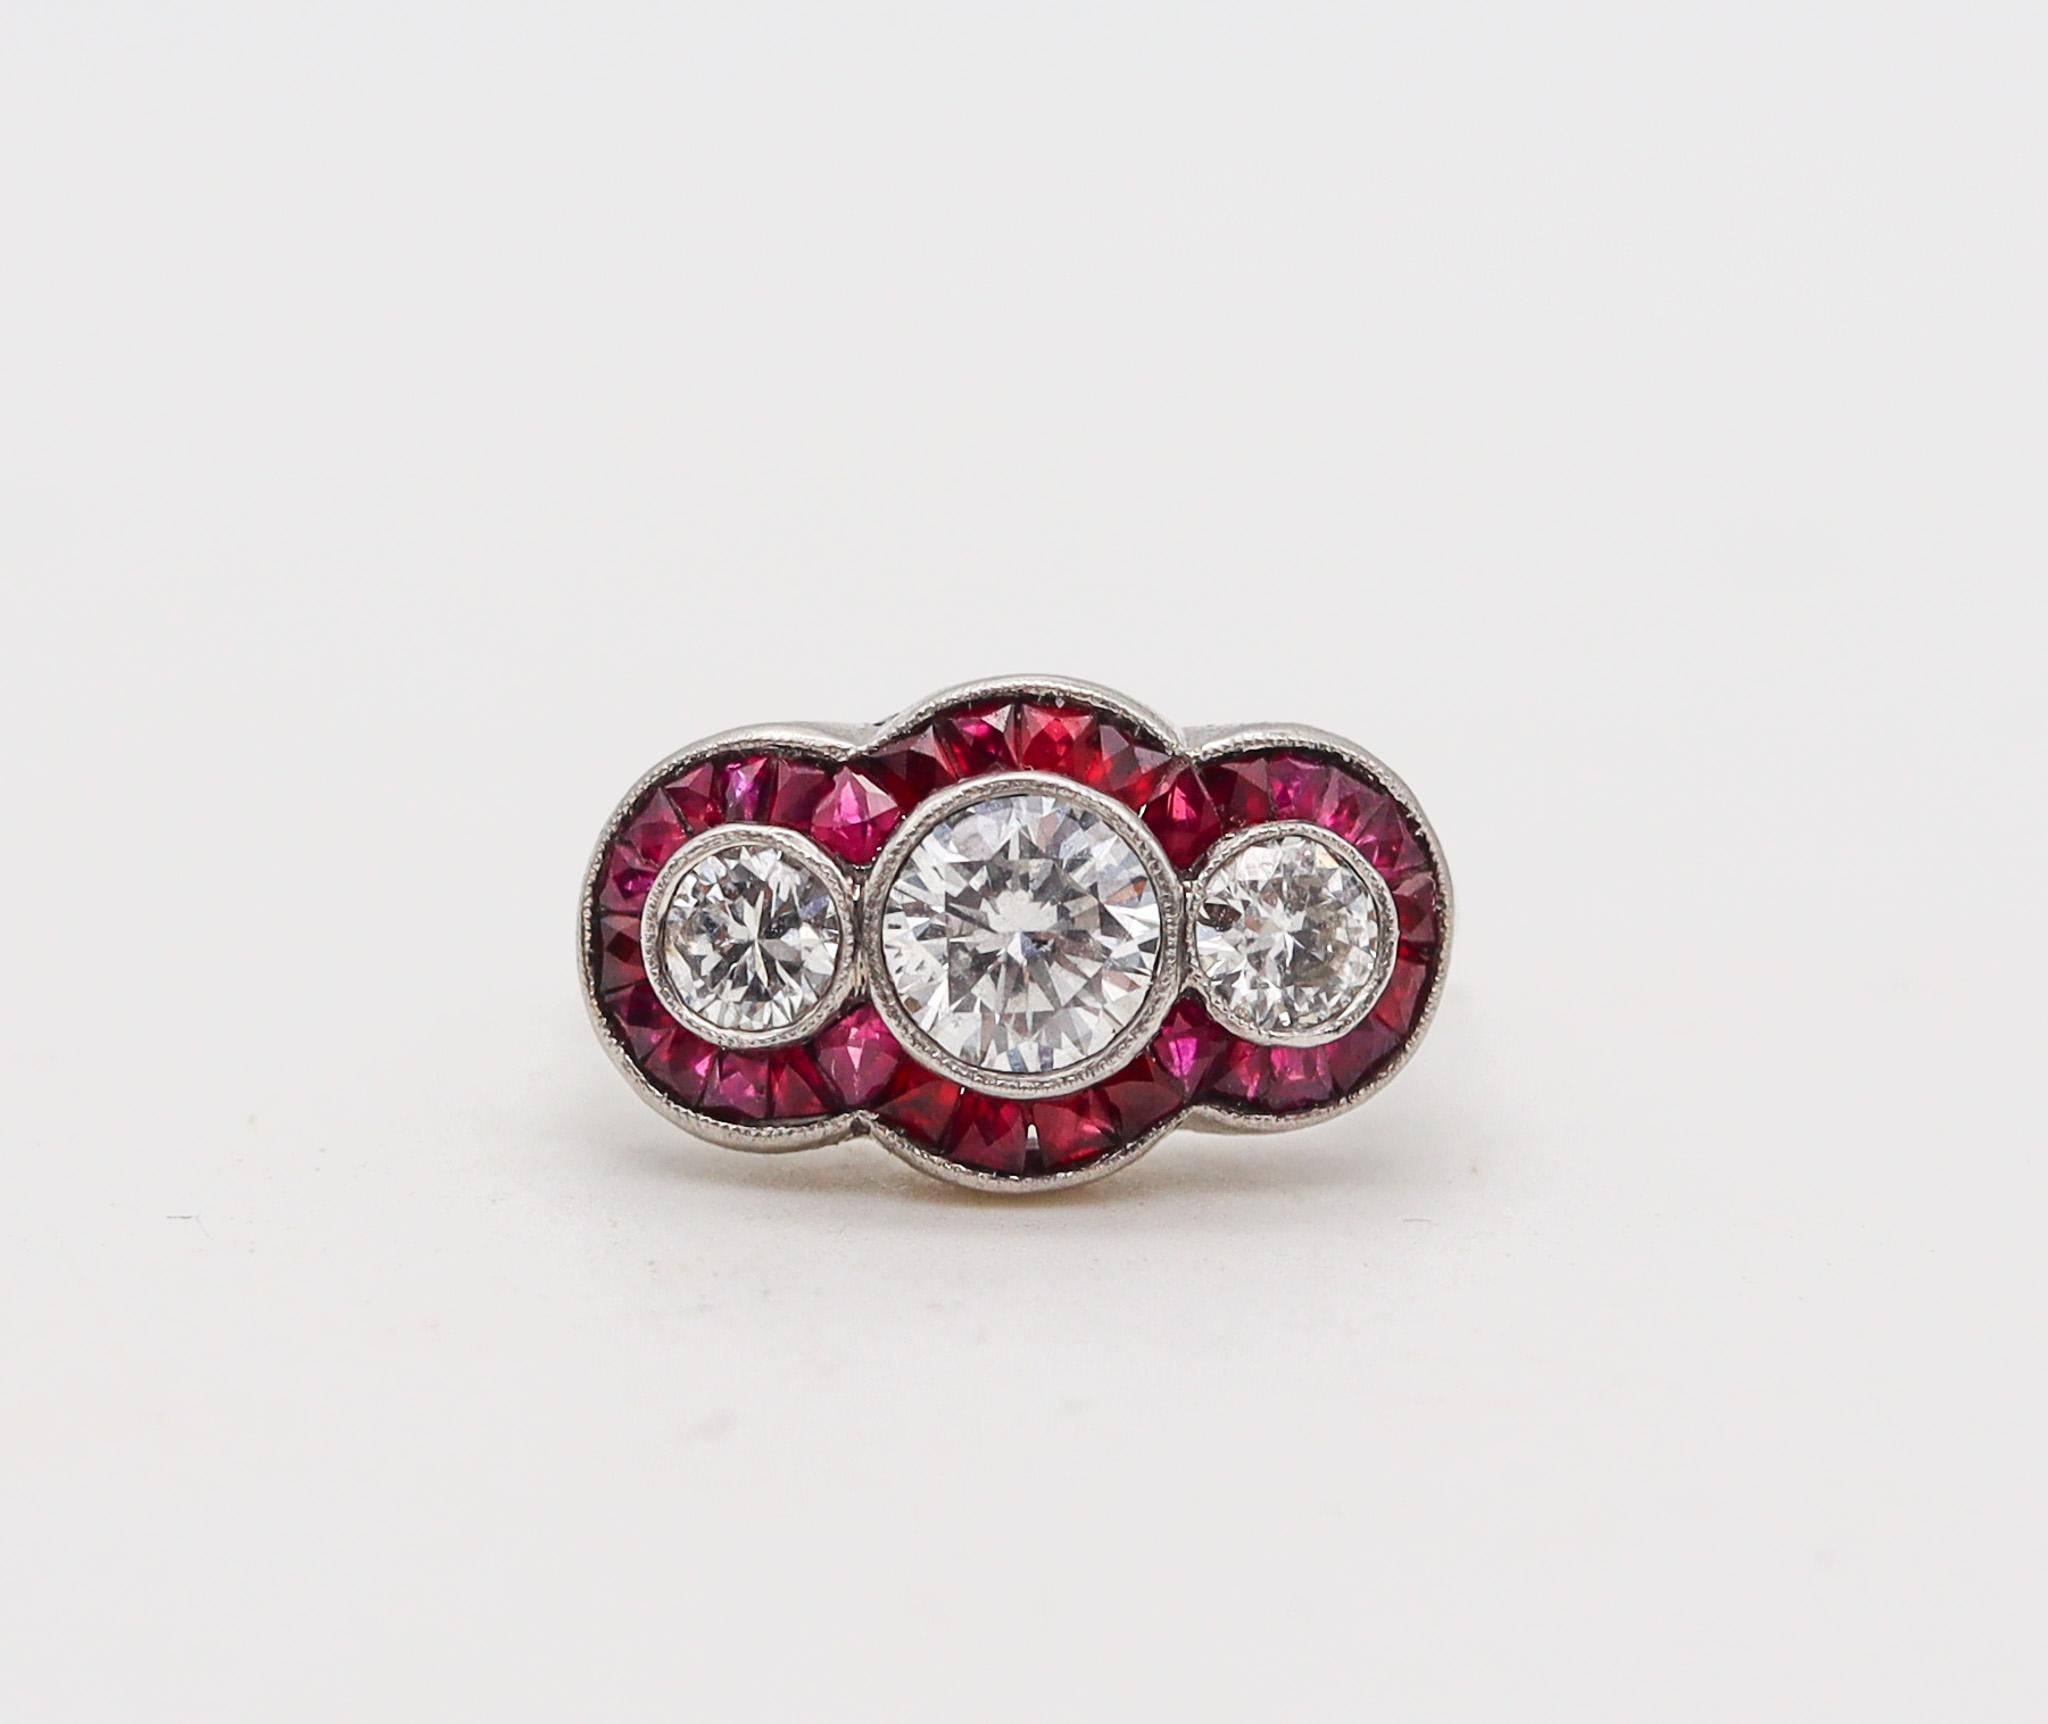 Round Cut Art Deco 1925 Three Gems Ring In Platinum With 1.42 Ctw Diamonds And Rubies